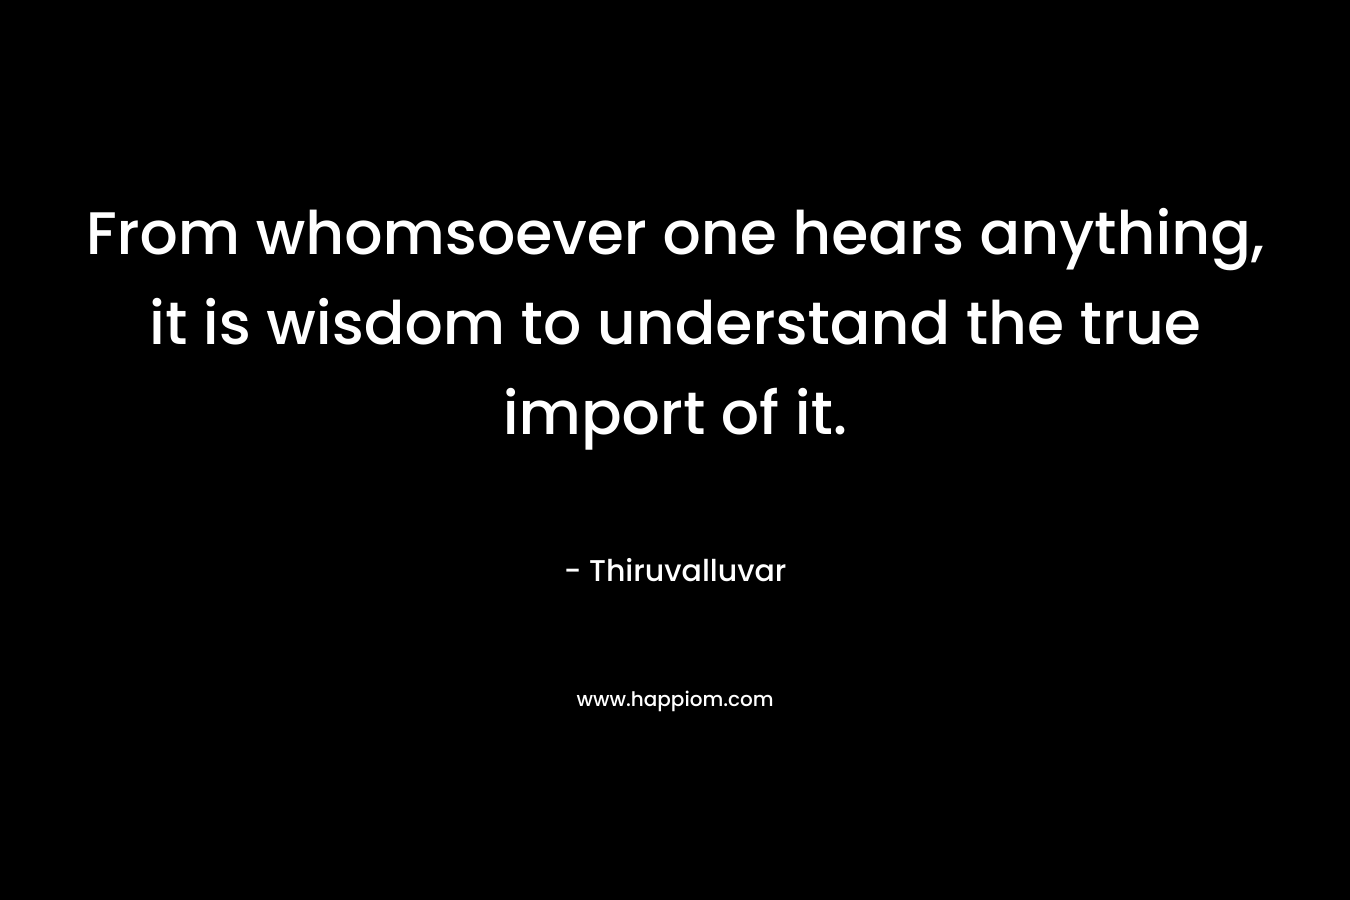 From whomsoever one hears anything, it is wisdom to understand the true import of it.